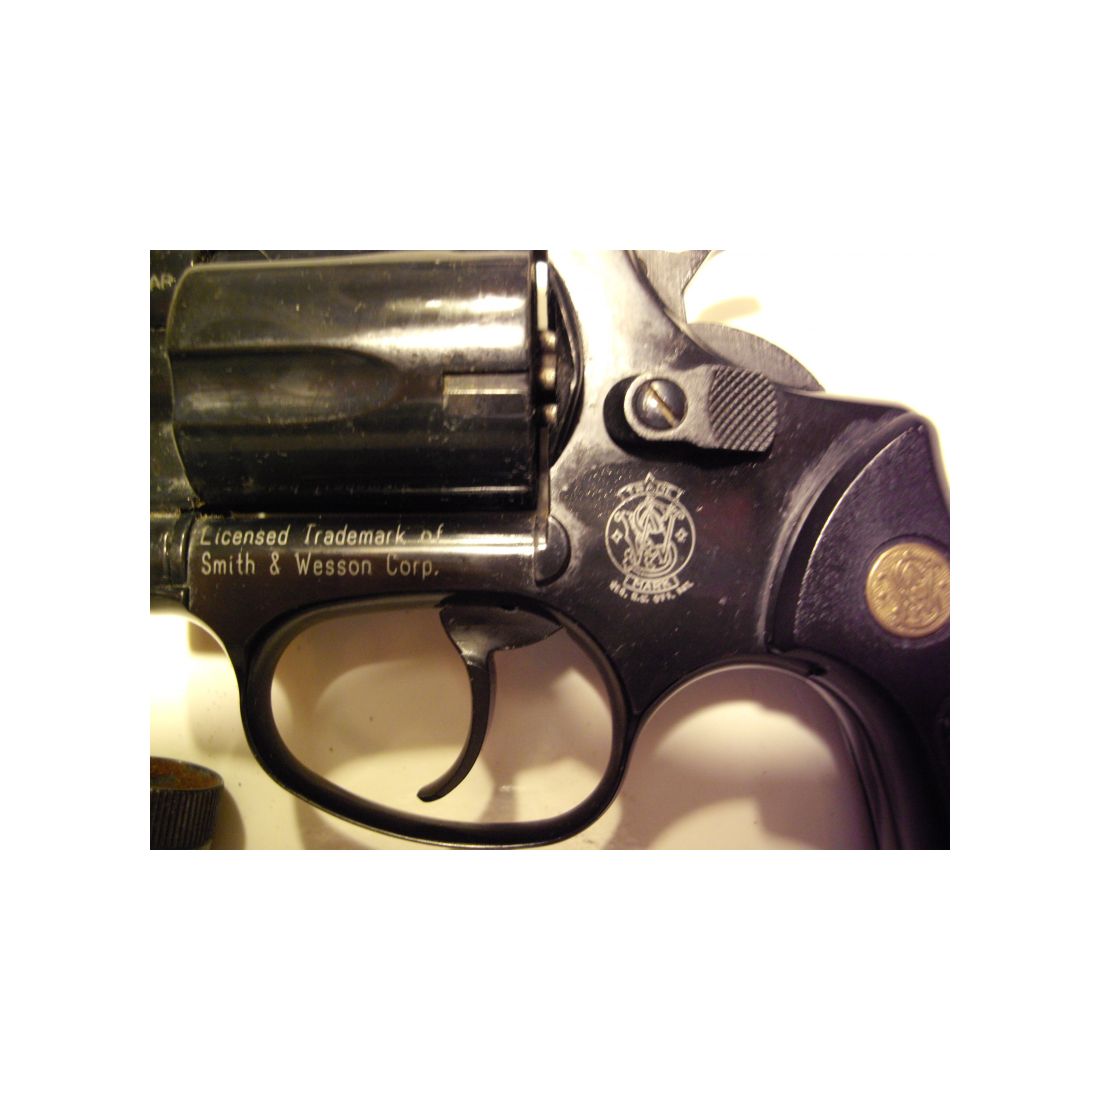 Gasrevolver Smith & Wesson 9mm Knall